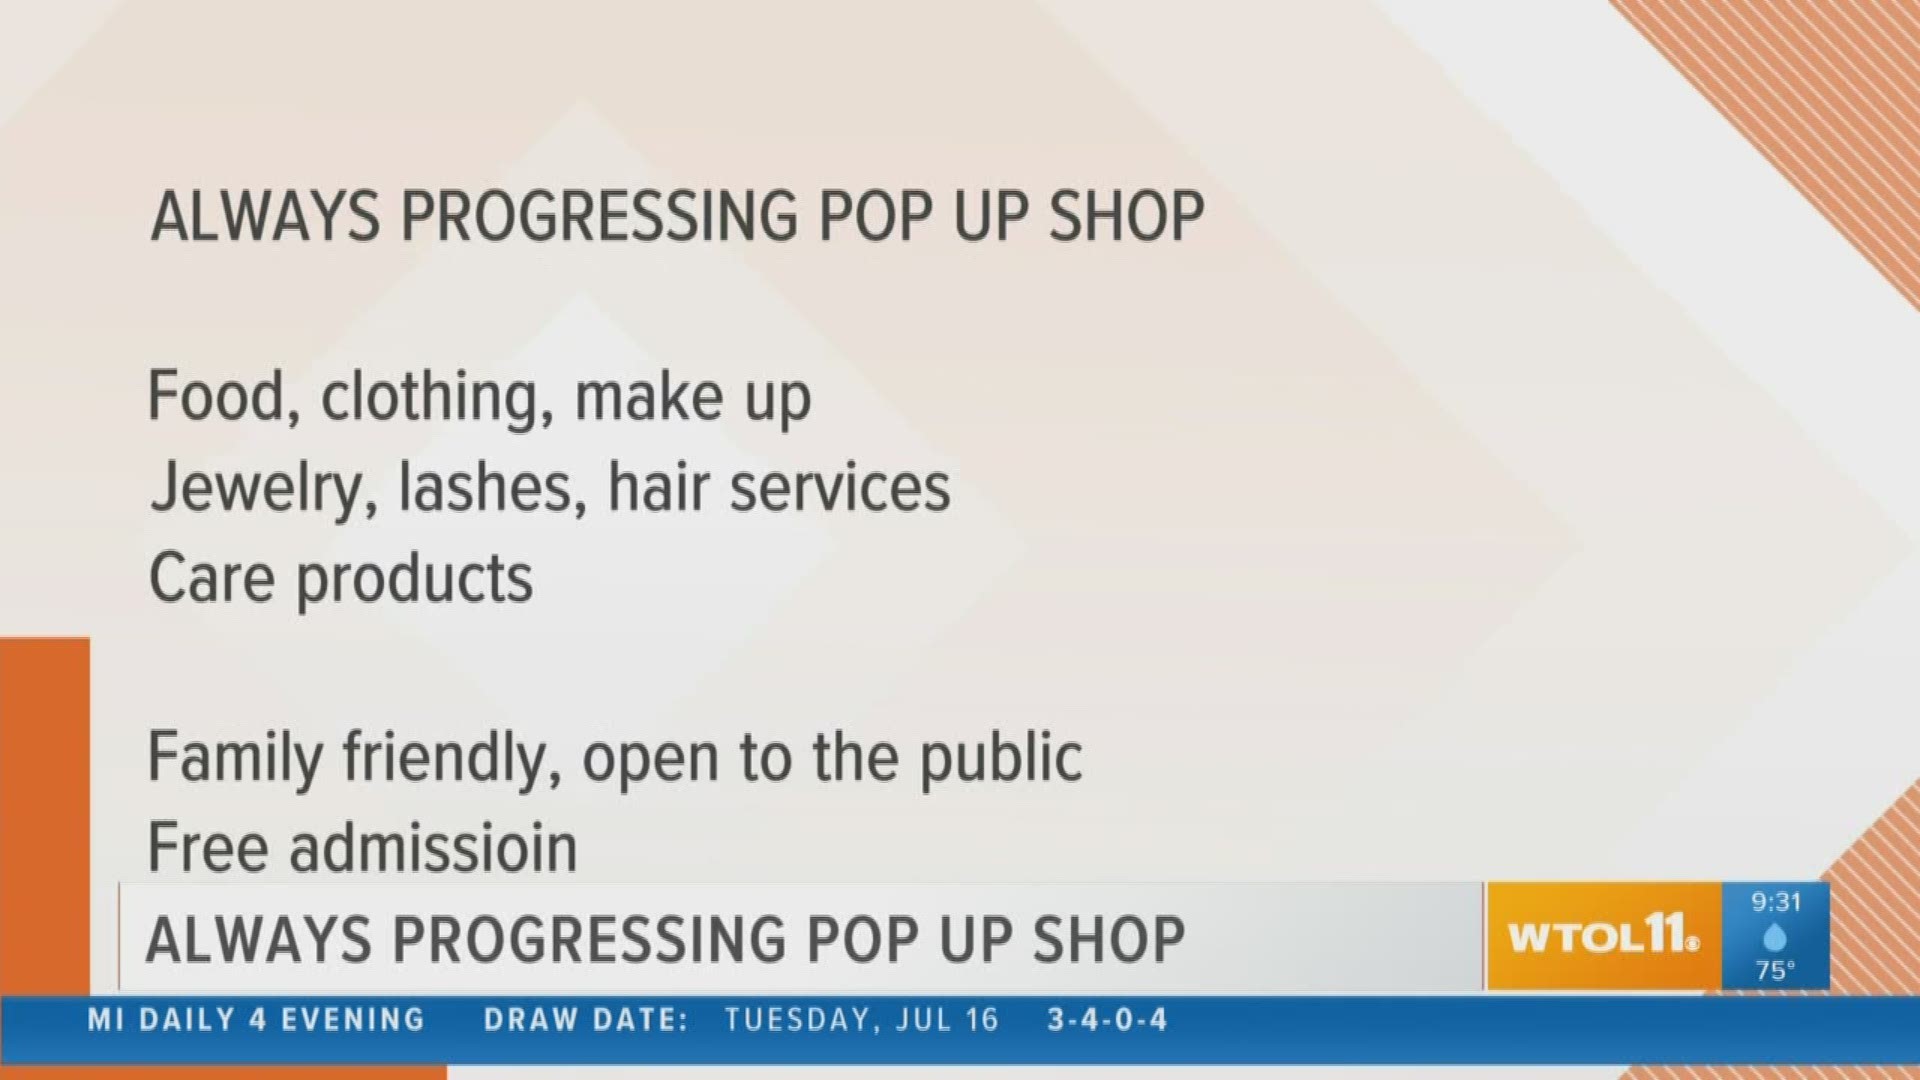 Check out the Always Progressing Pop-up Shop at the Believe Center this Sunday!